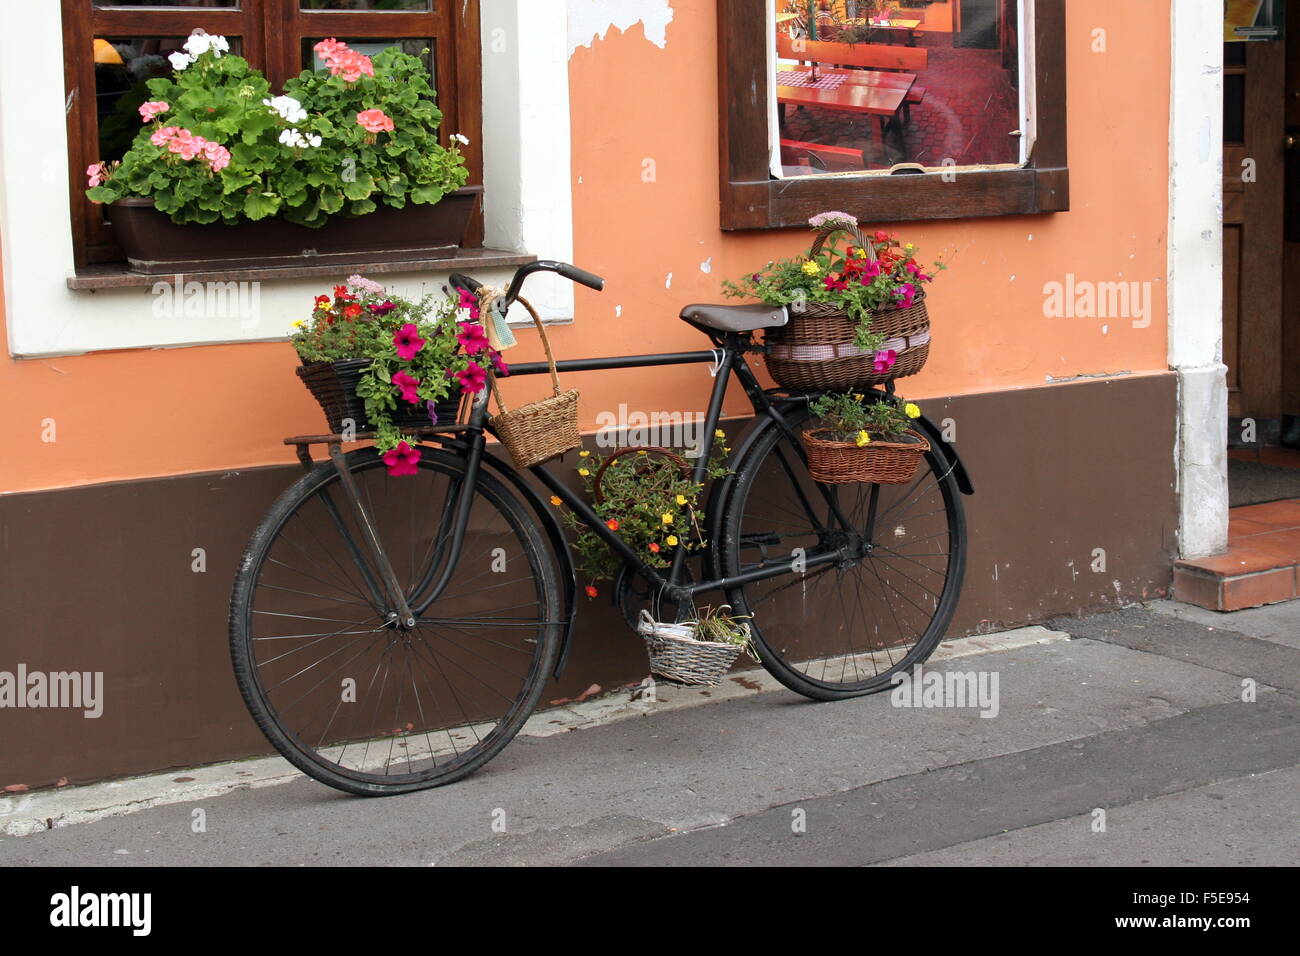 Bicycle used as a flower stand Stock Photo